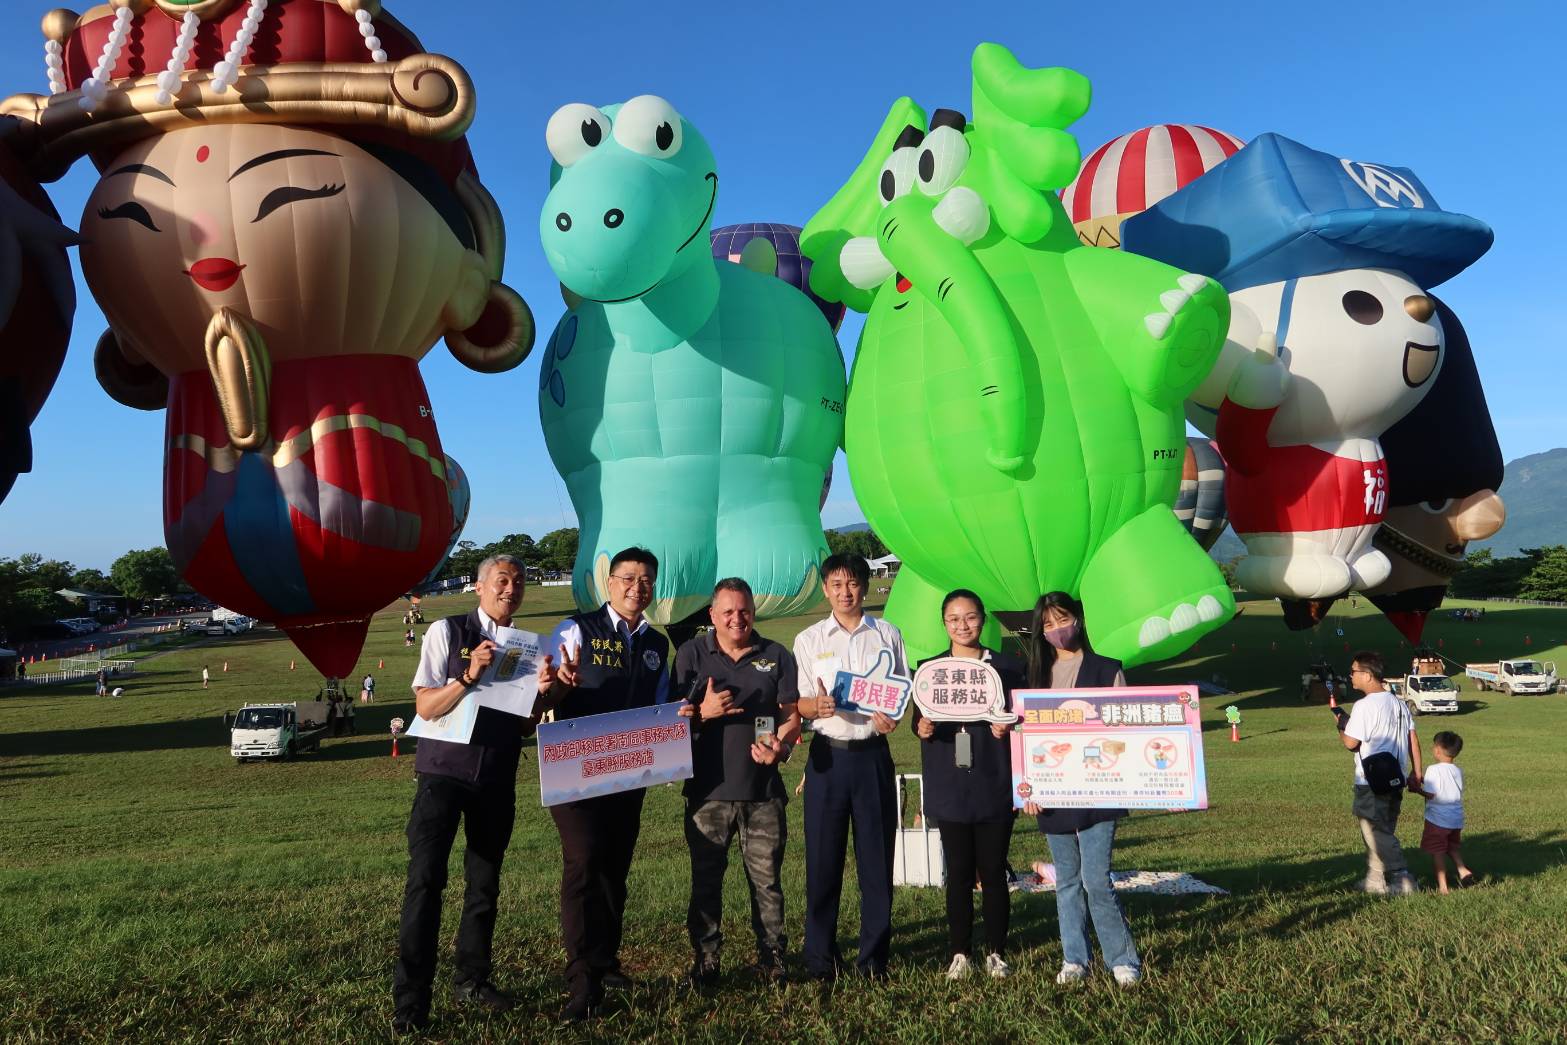 NIA Taitung County Service Center promotes anti-bribery election with pilots at Taiwan International Balloon Festival.  Photo provided by NIA